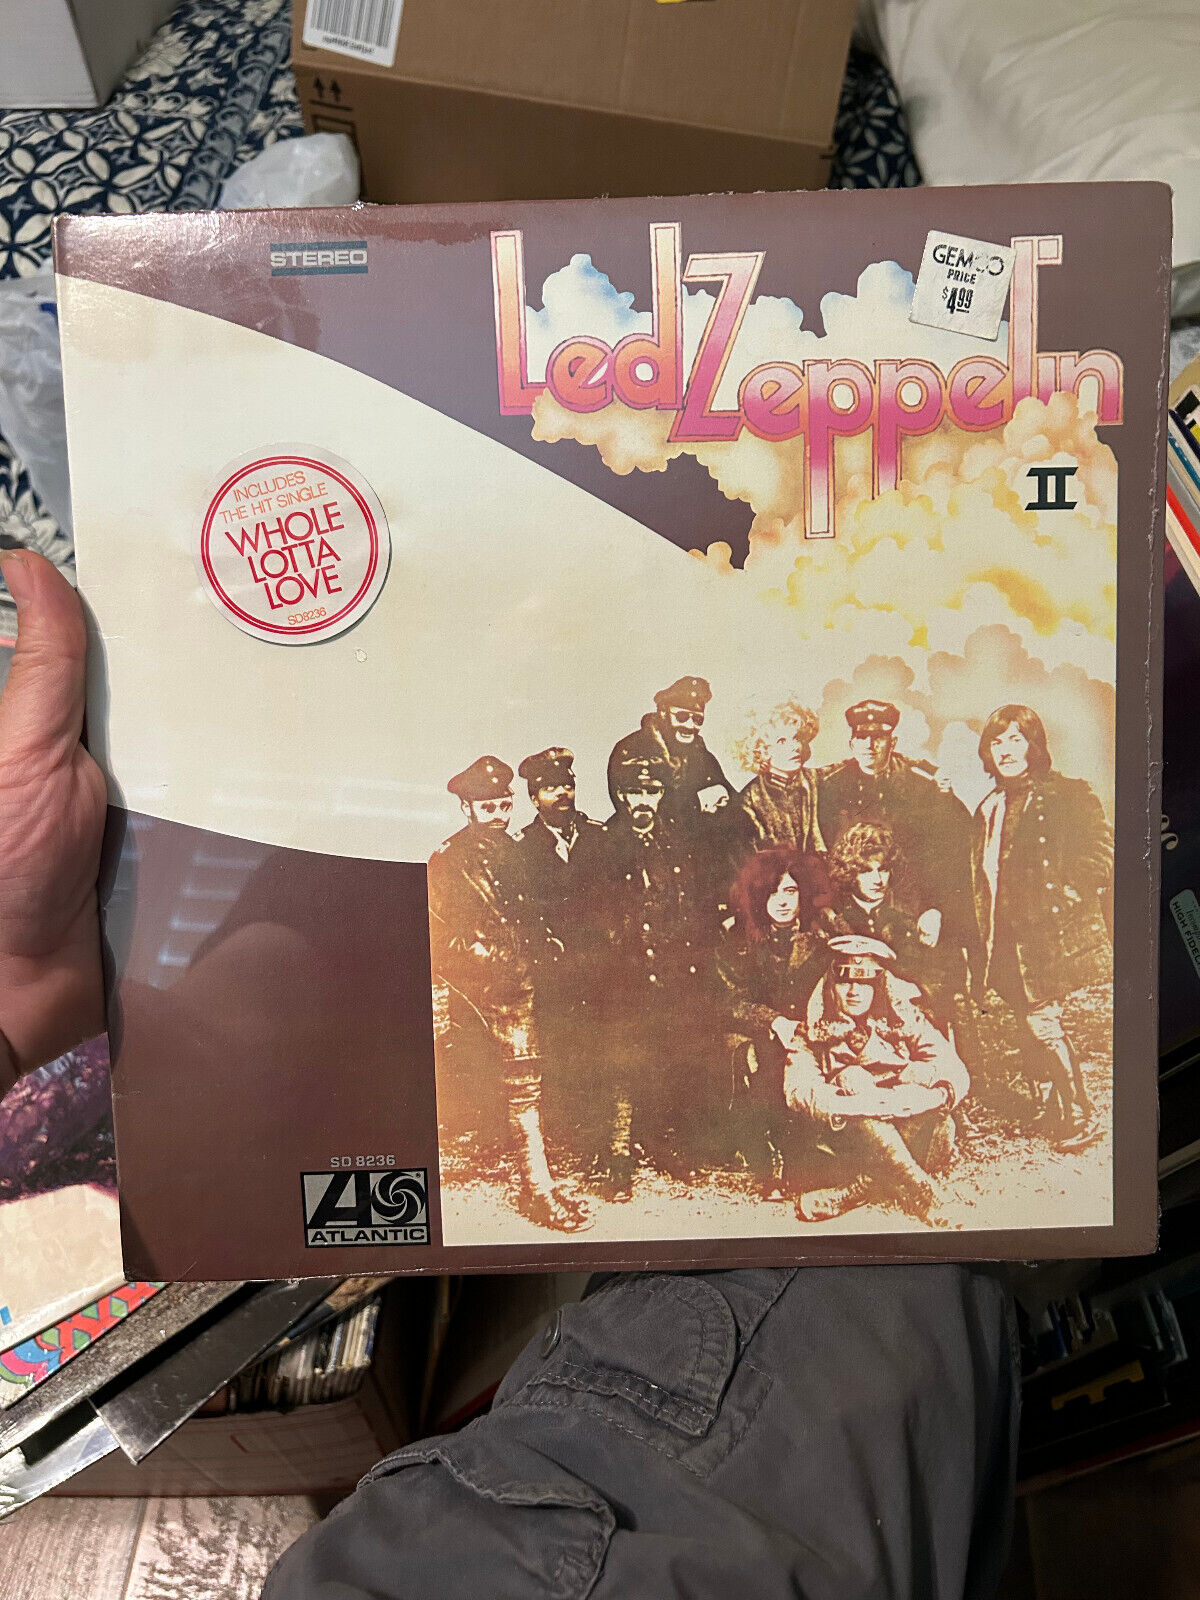 popsike.com - HOLY GRAIL * LED ZEPPELIN II / 1969 8236 / FACTORY SEALED W/ HYPE - auction details